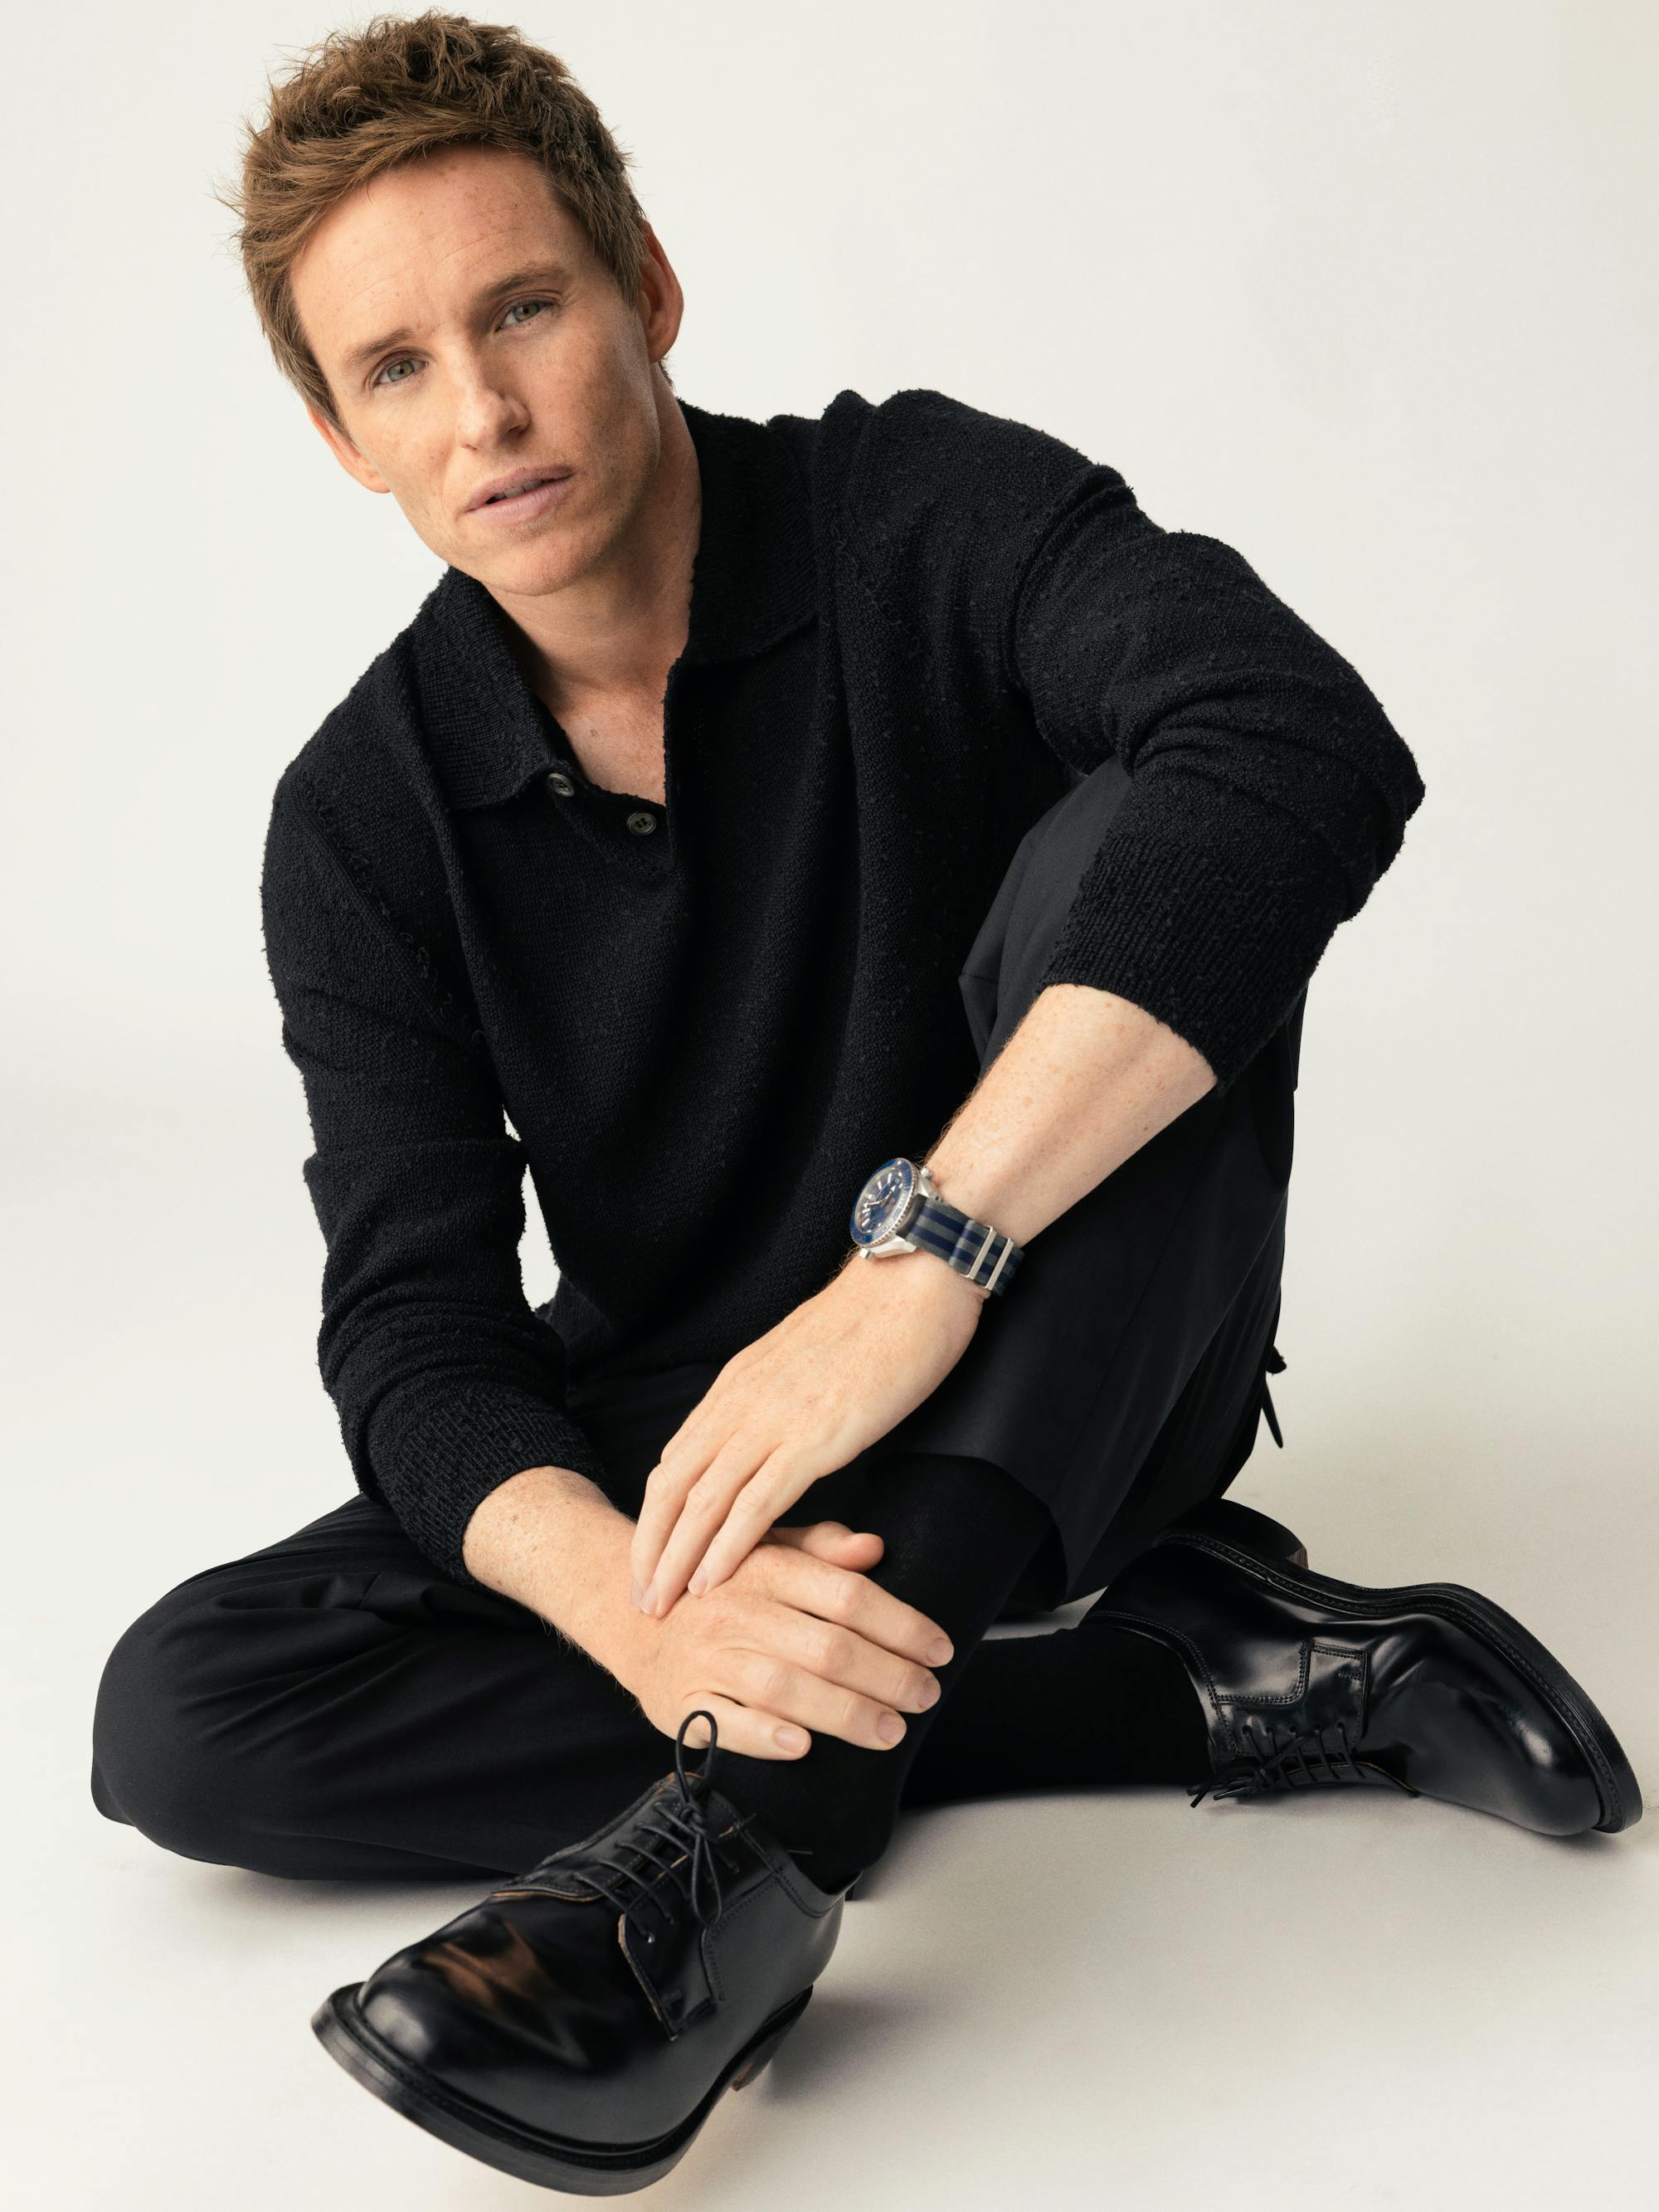 Eddie Redmayne on a digital cover of Queue wearing a black ensemble, shoes, and a black watch.